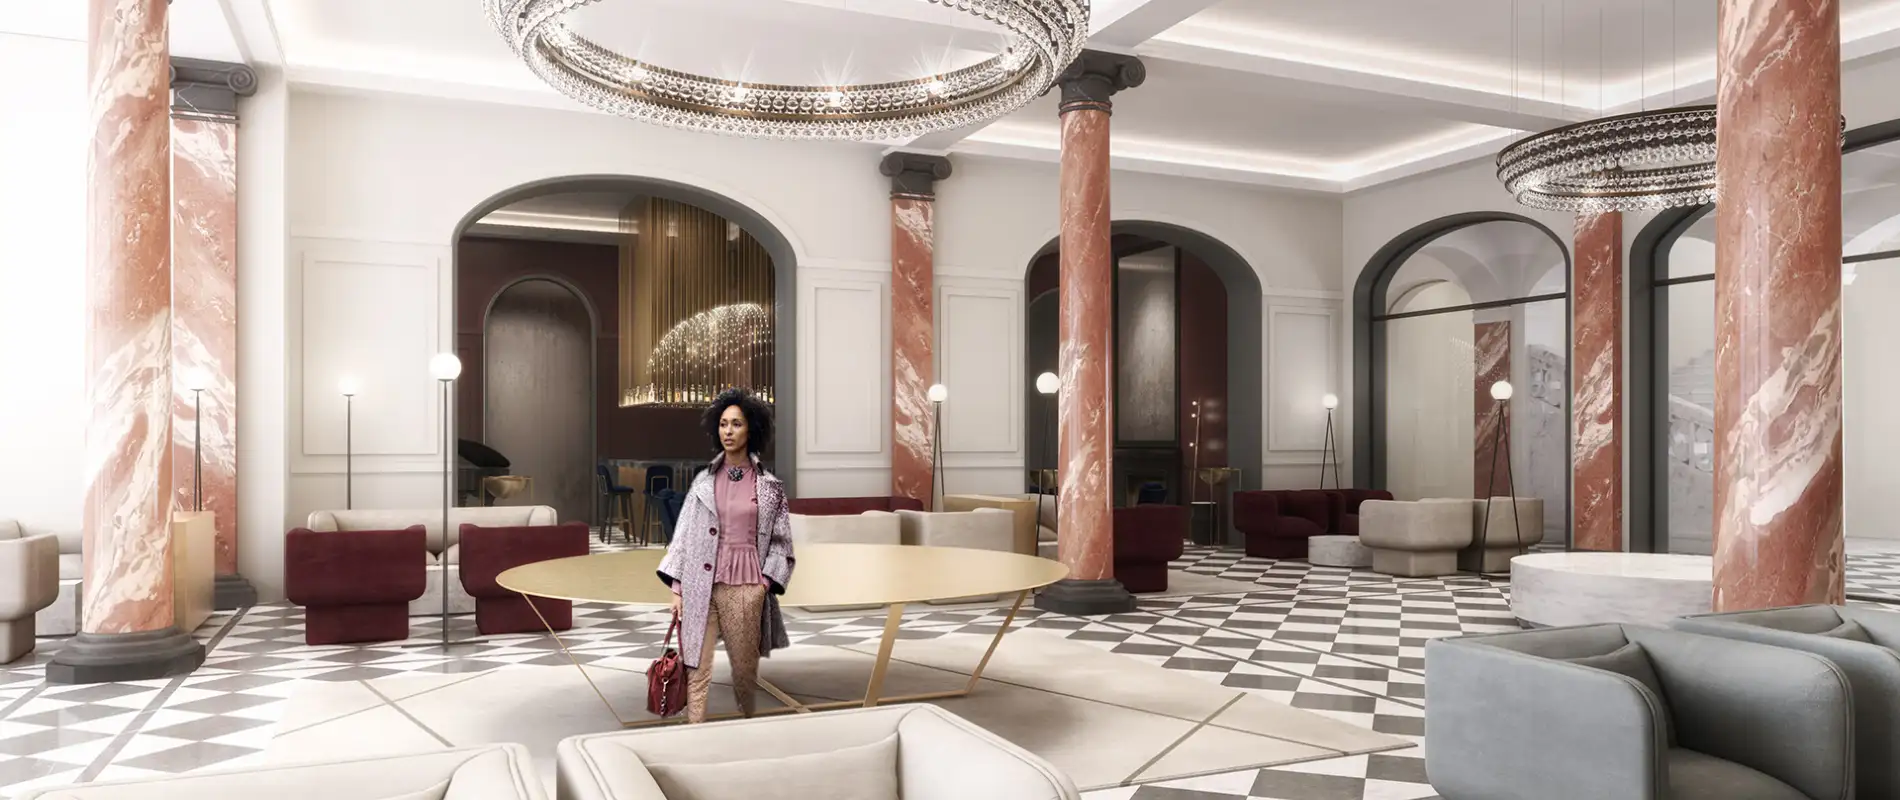 Hotel - Palace Hotel Lucerne - Interior Design Competition - lounge rendering